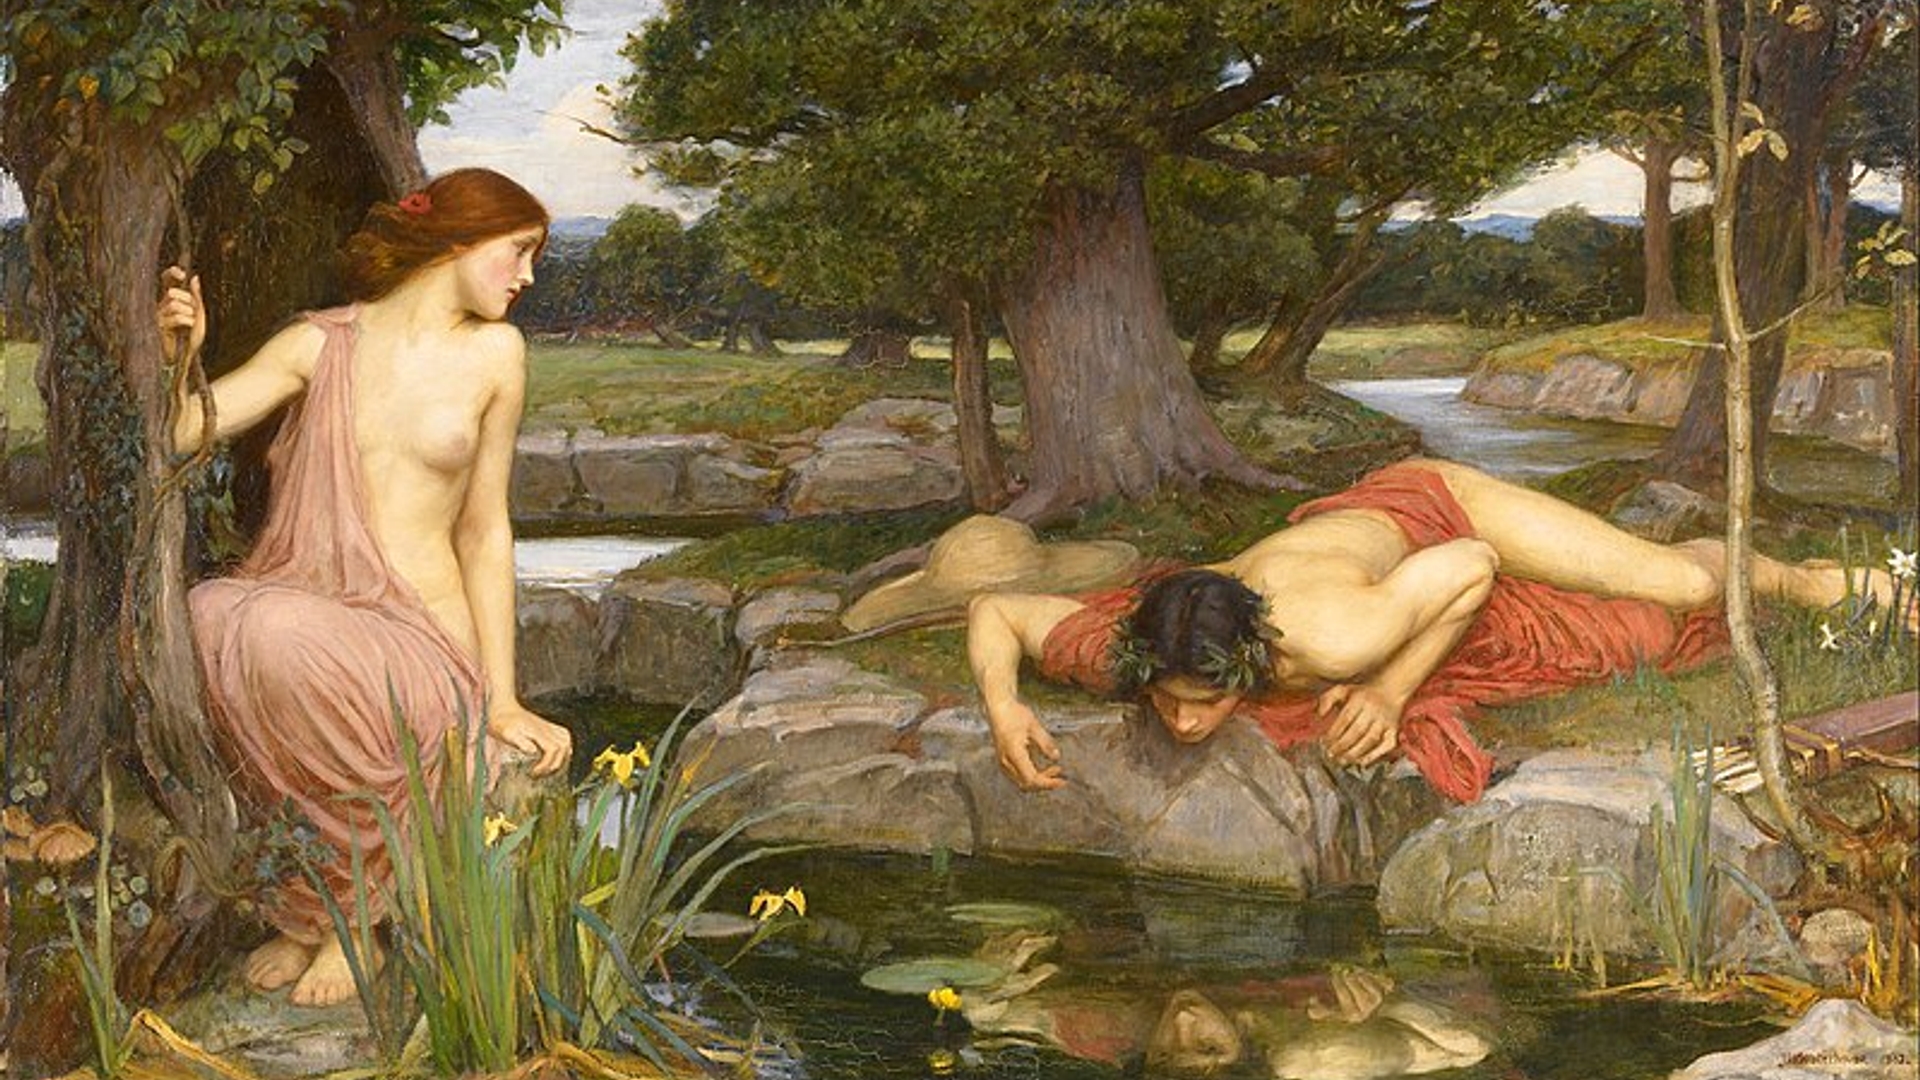 800px-John_William_Waterhouse_-_Echo_and_Narcissus_-_Google_Art_Project